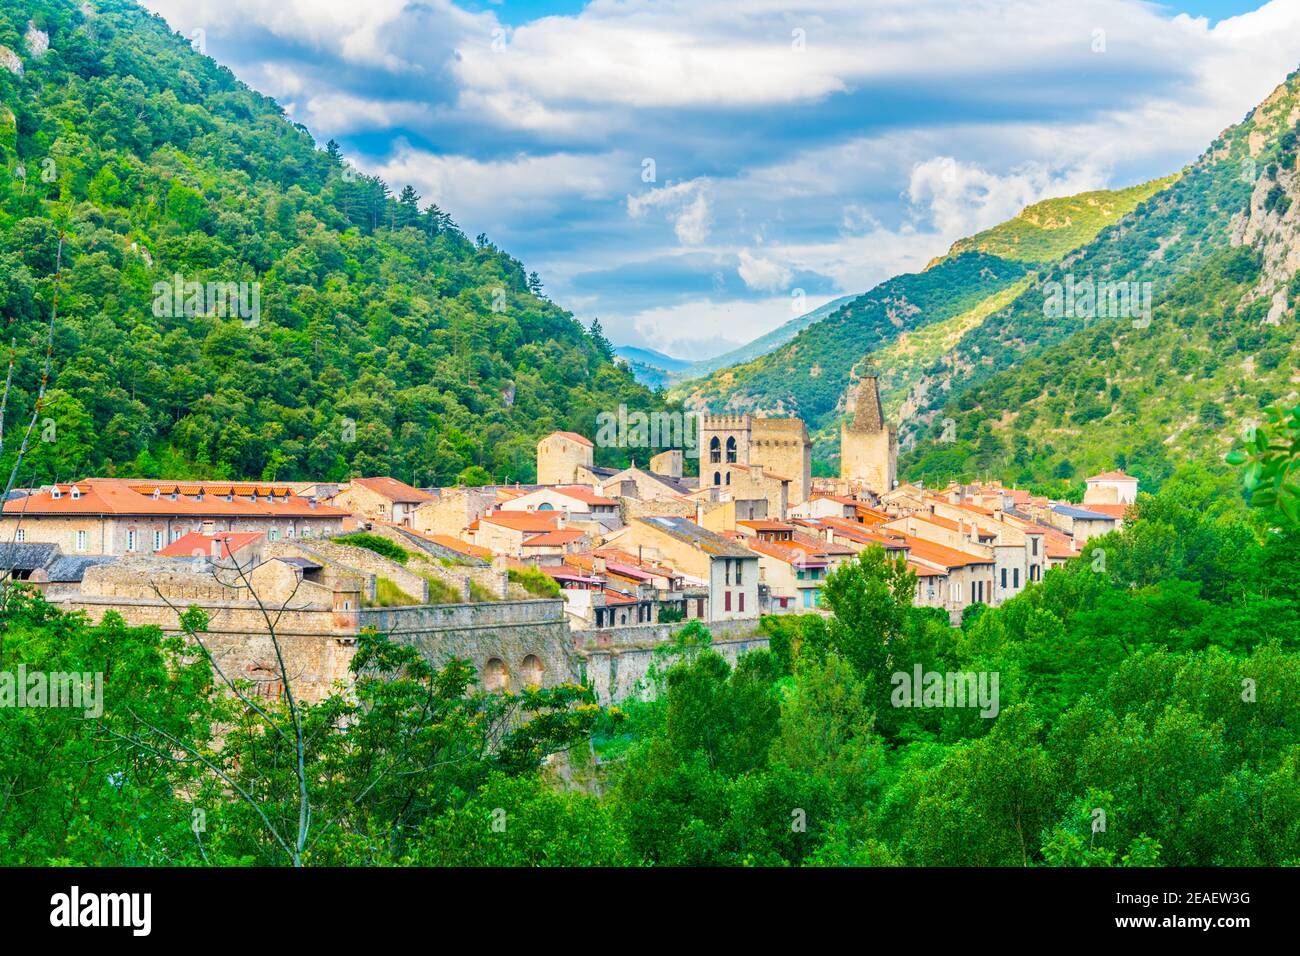 Aerial view of Villefranche de Conflent village in France Stock Photo